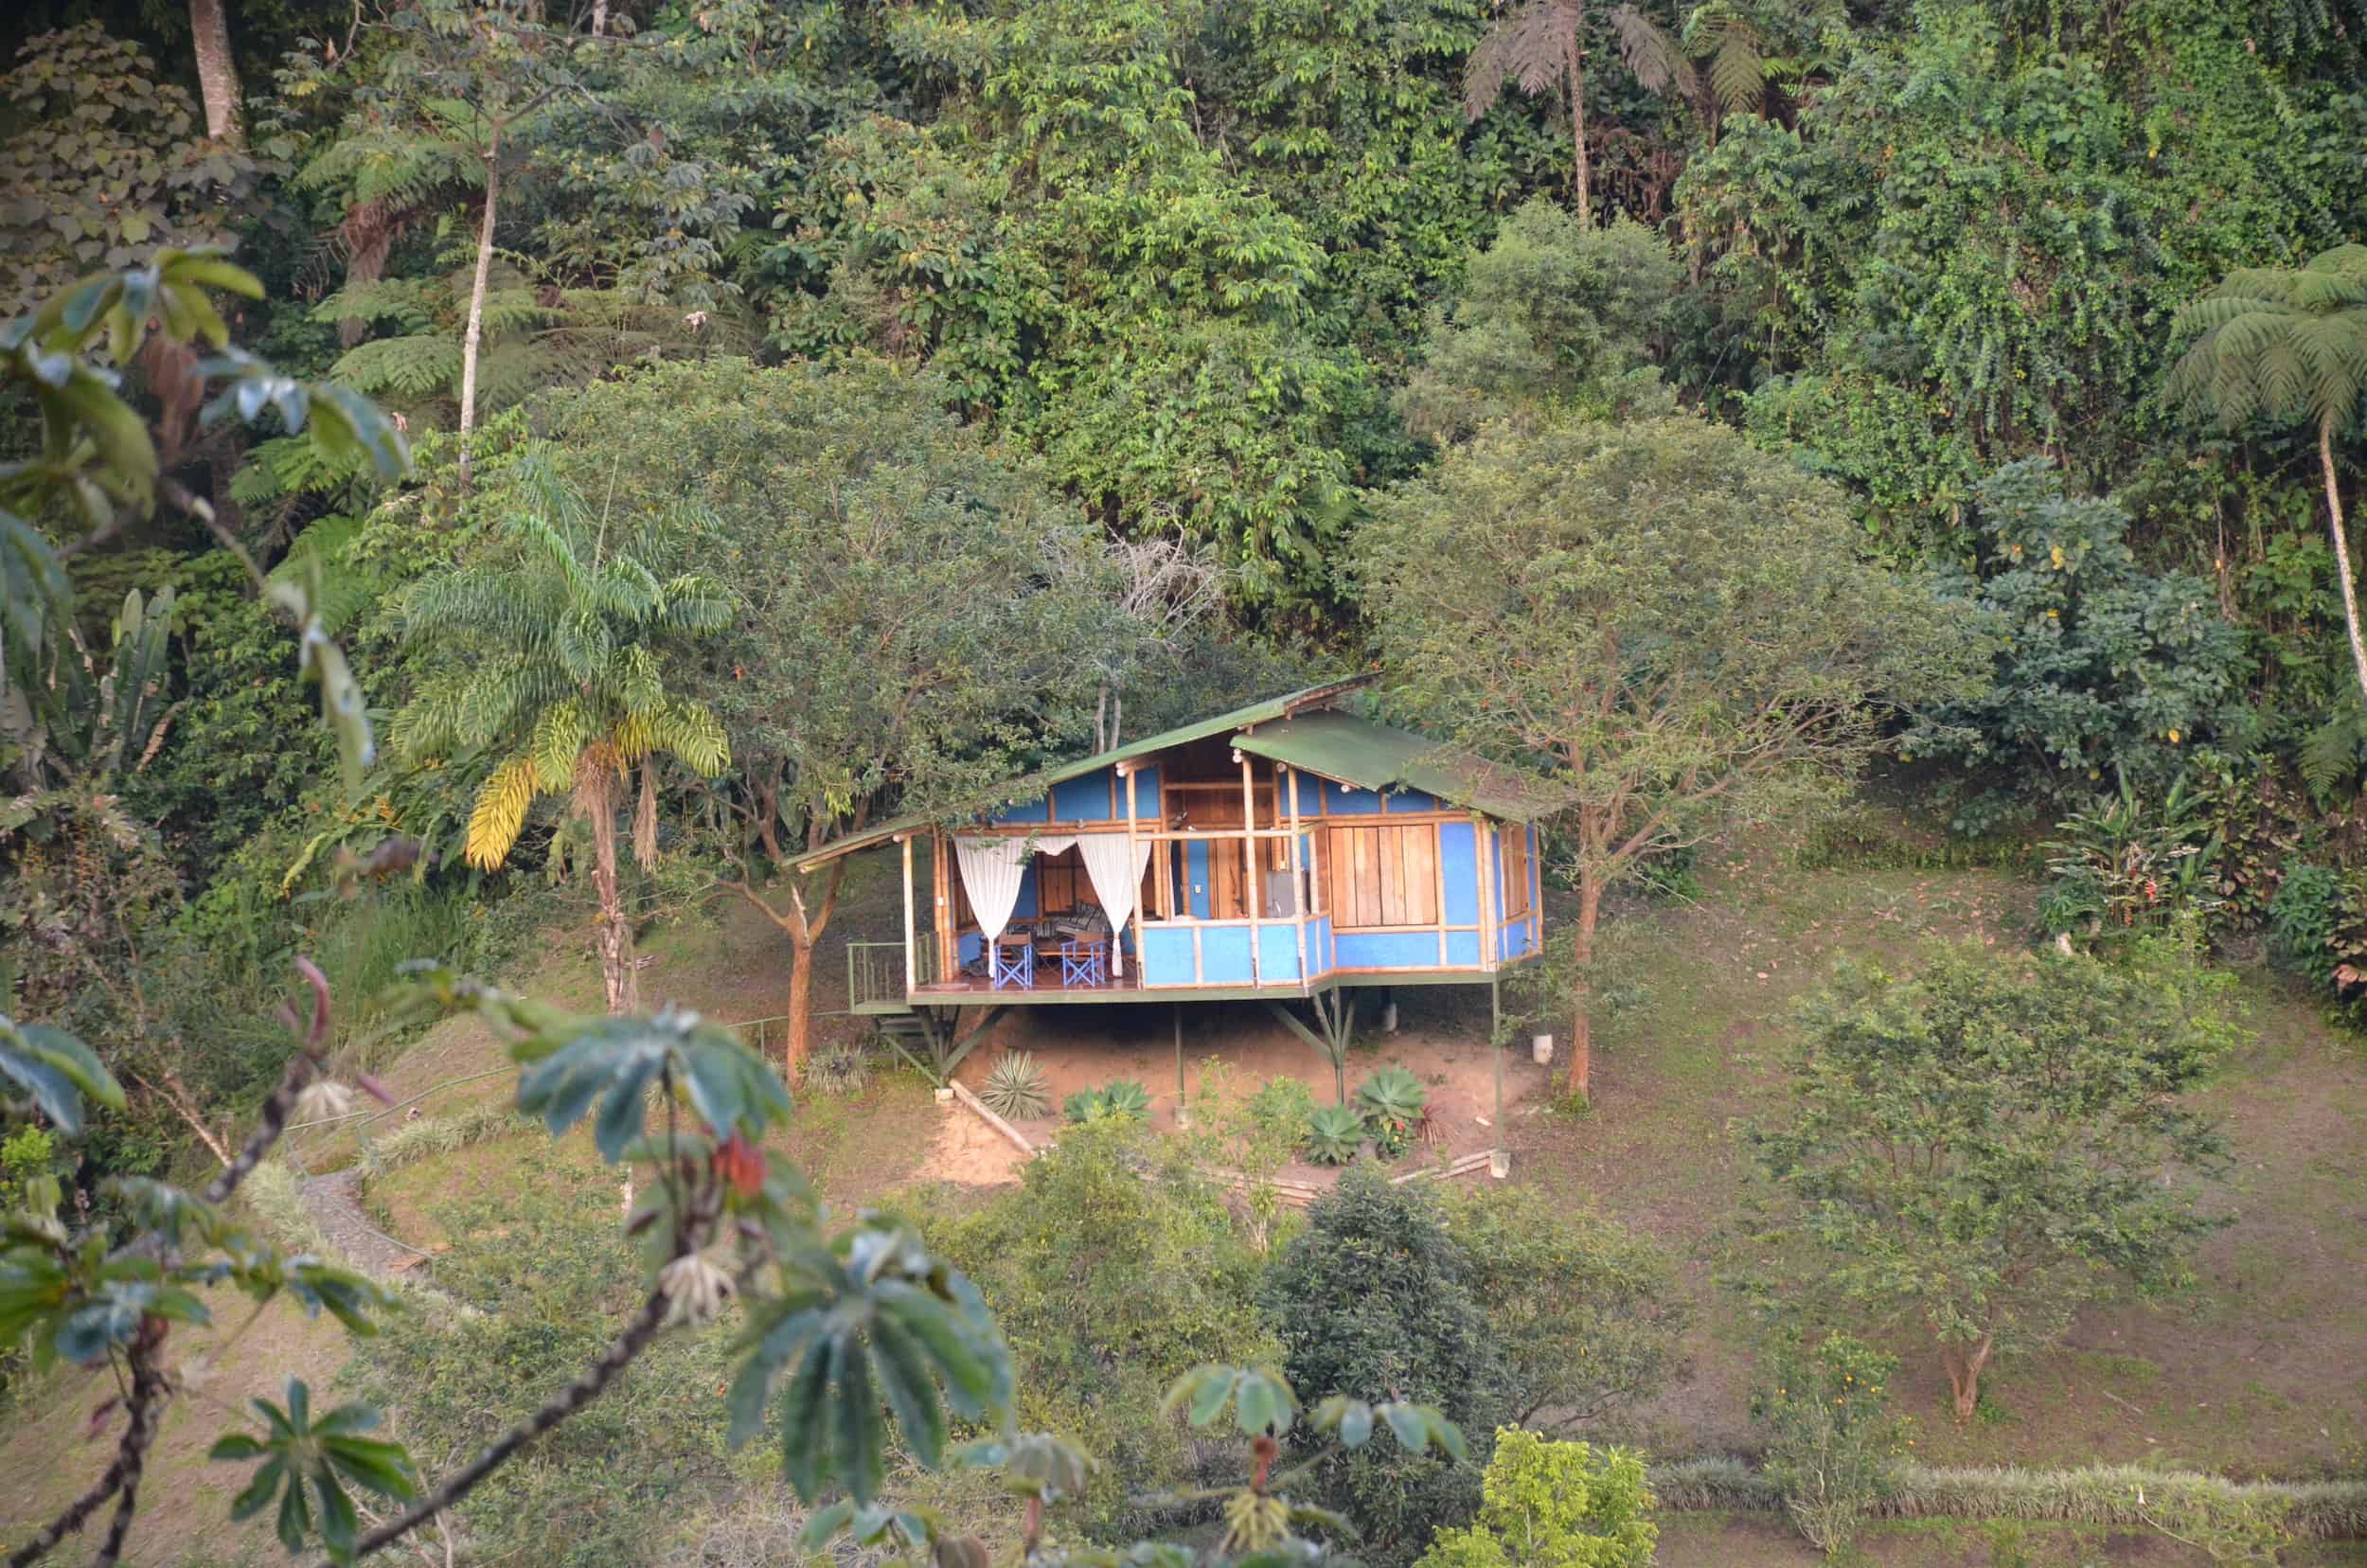 Looking at the blue cabin from across the hill at Soñarte in Córdoba, Quindío, Colombia